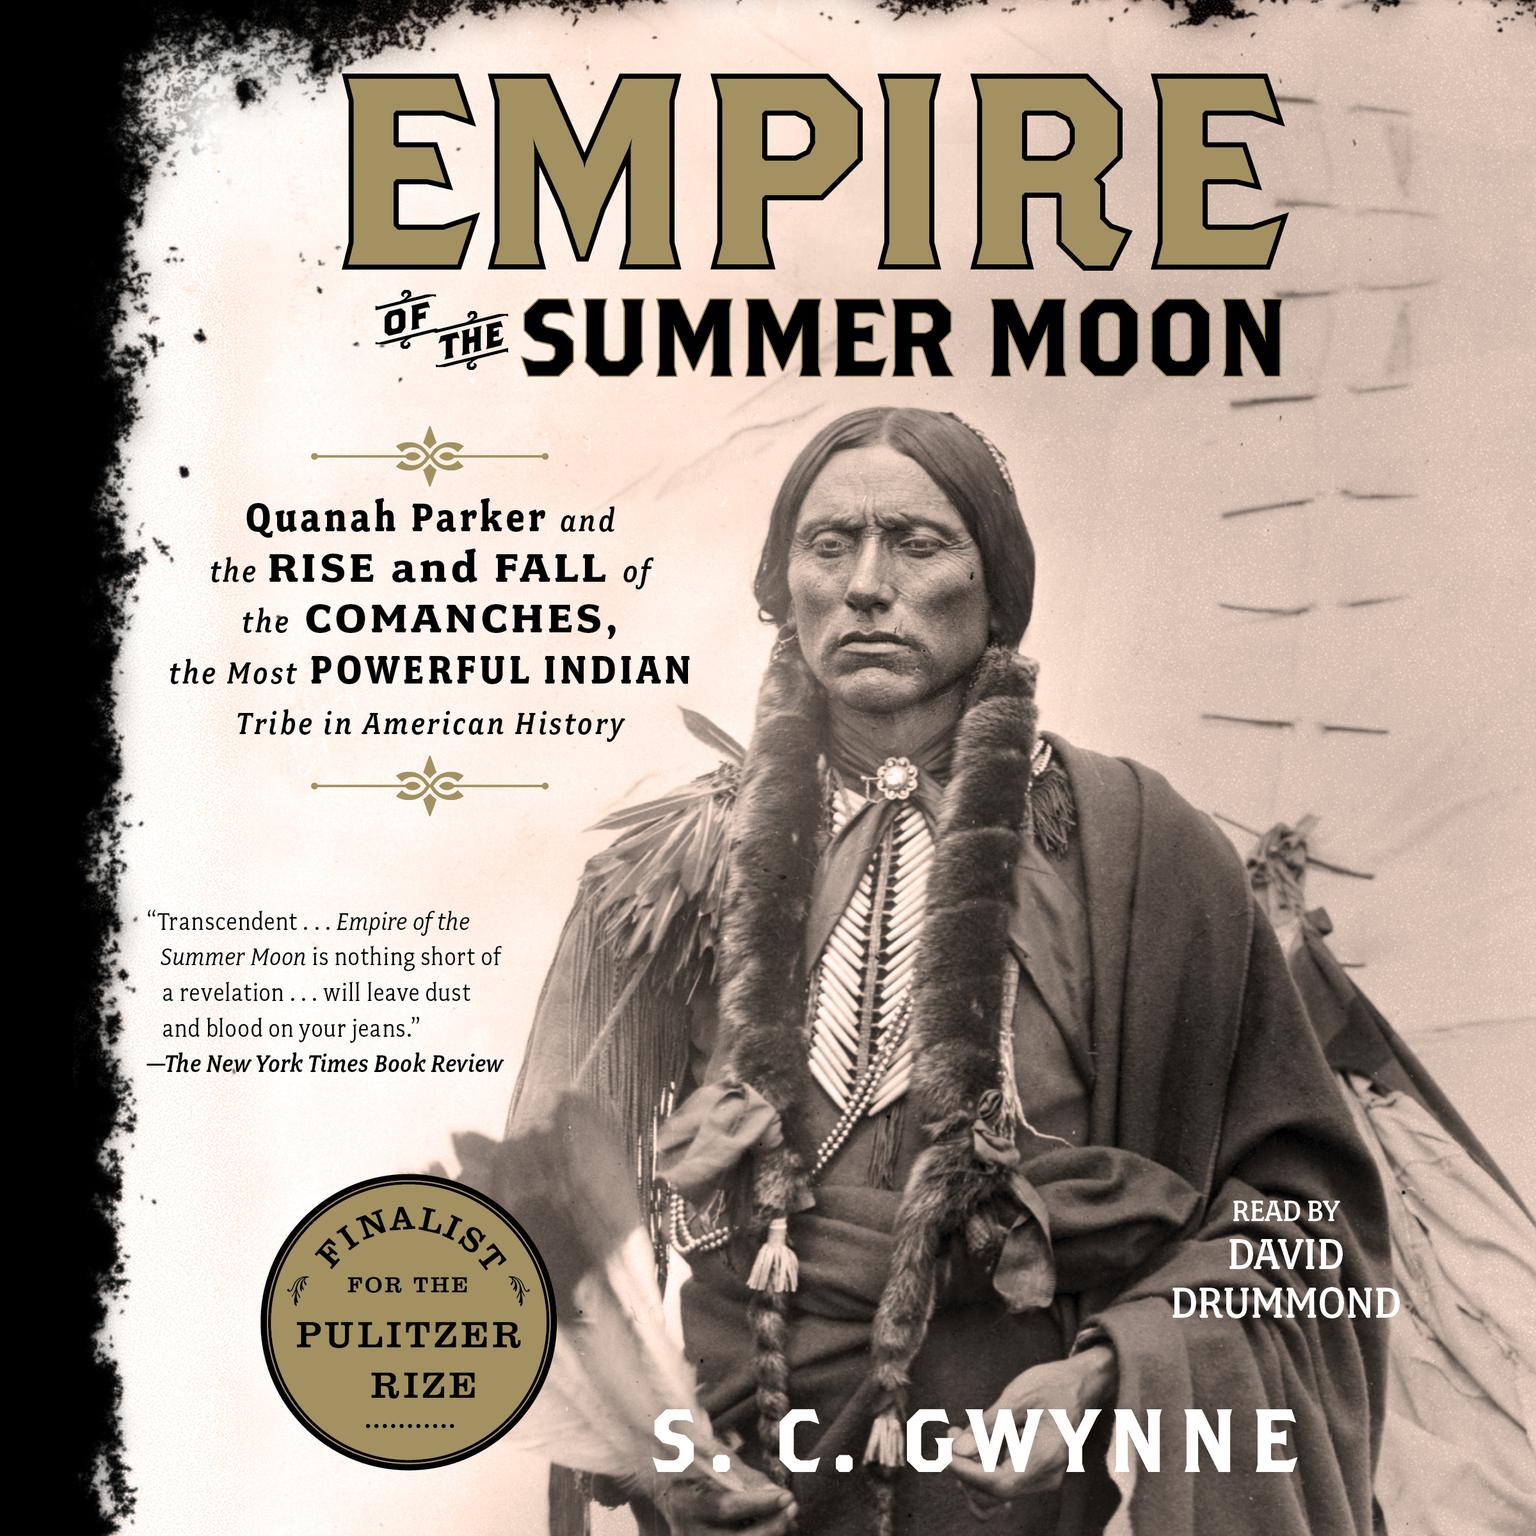 Empire of the Summer Moon: Quanah Parker and the Rise and Fall of the Comanches, the Most Powerful Indian Tribe in American History Audiobook, by S. C. Gwynne